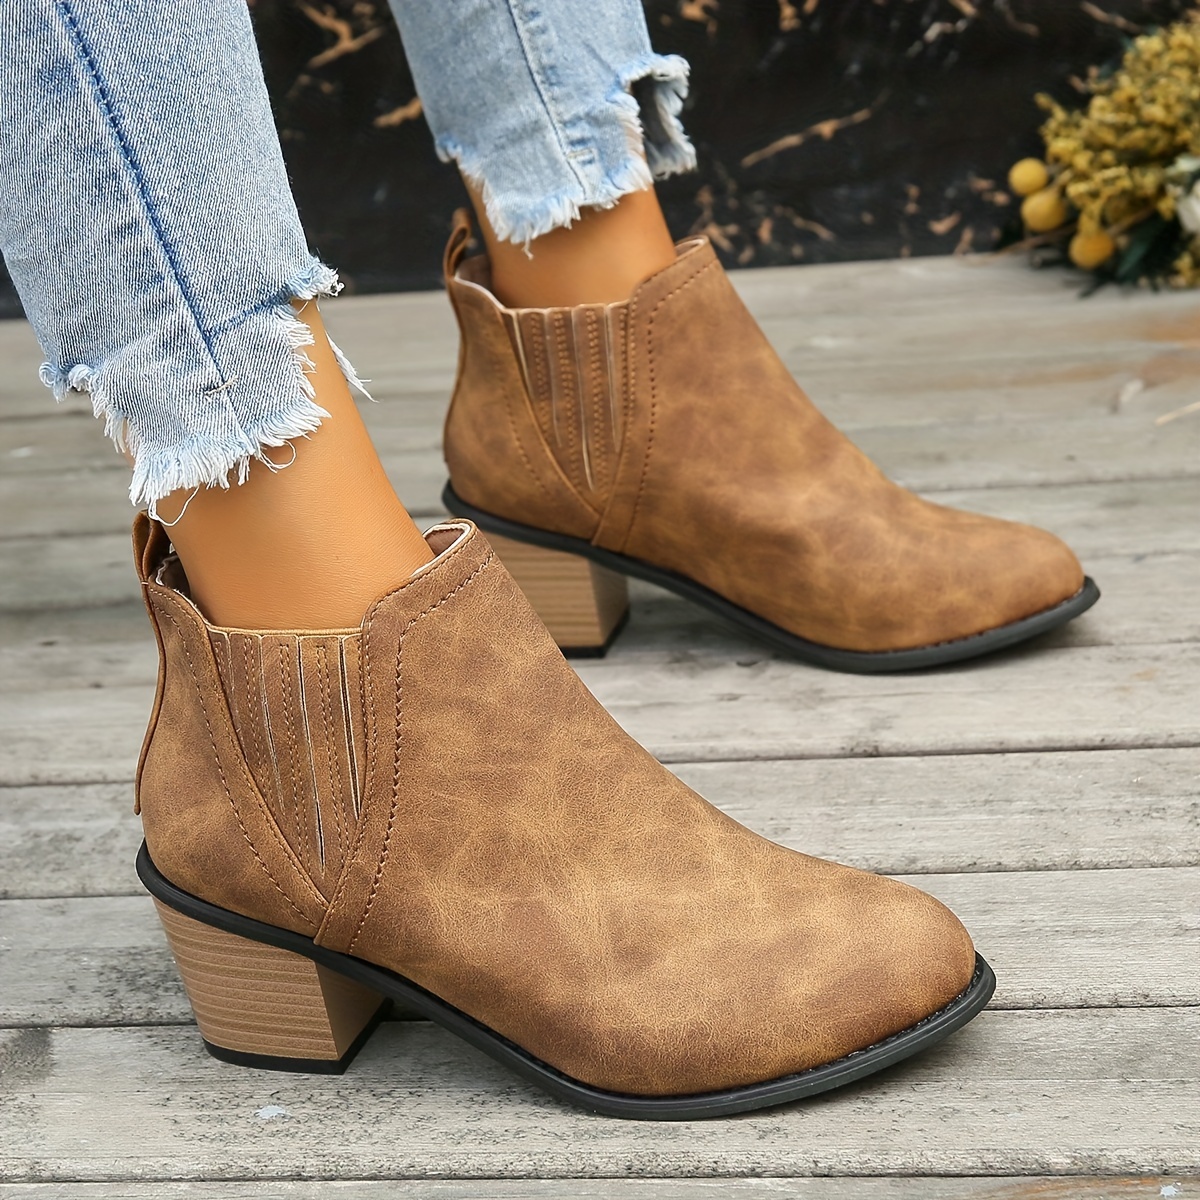 Women's Chunky Heeled Ankle Boots, Retro Elastic Slip On Short Boots, Women's Footwear